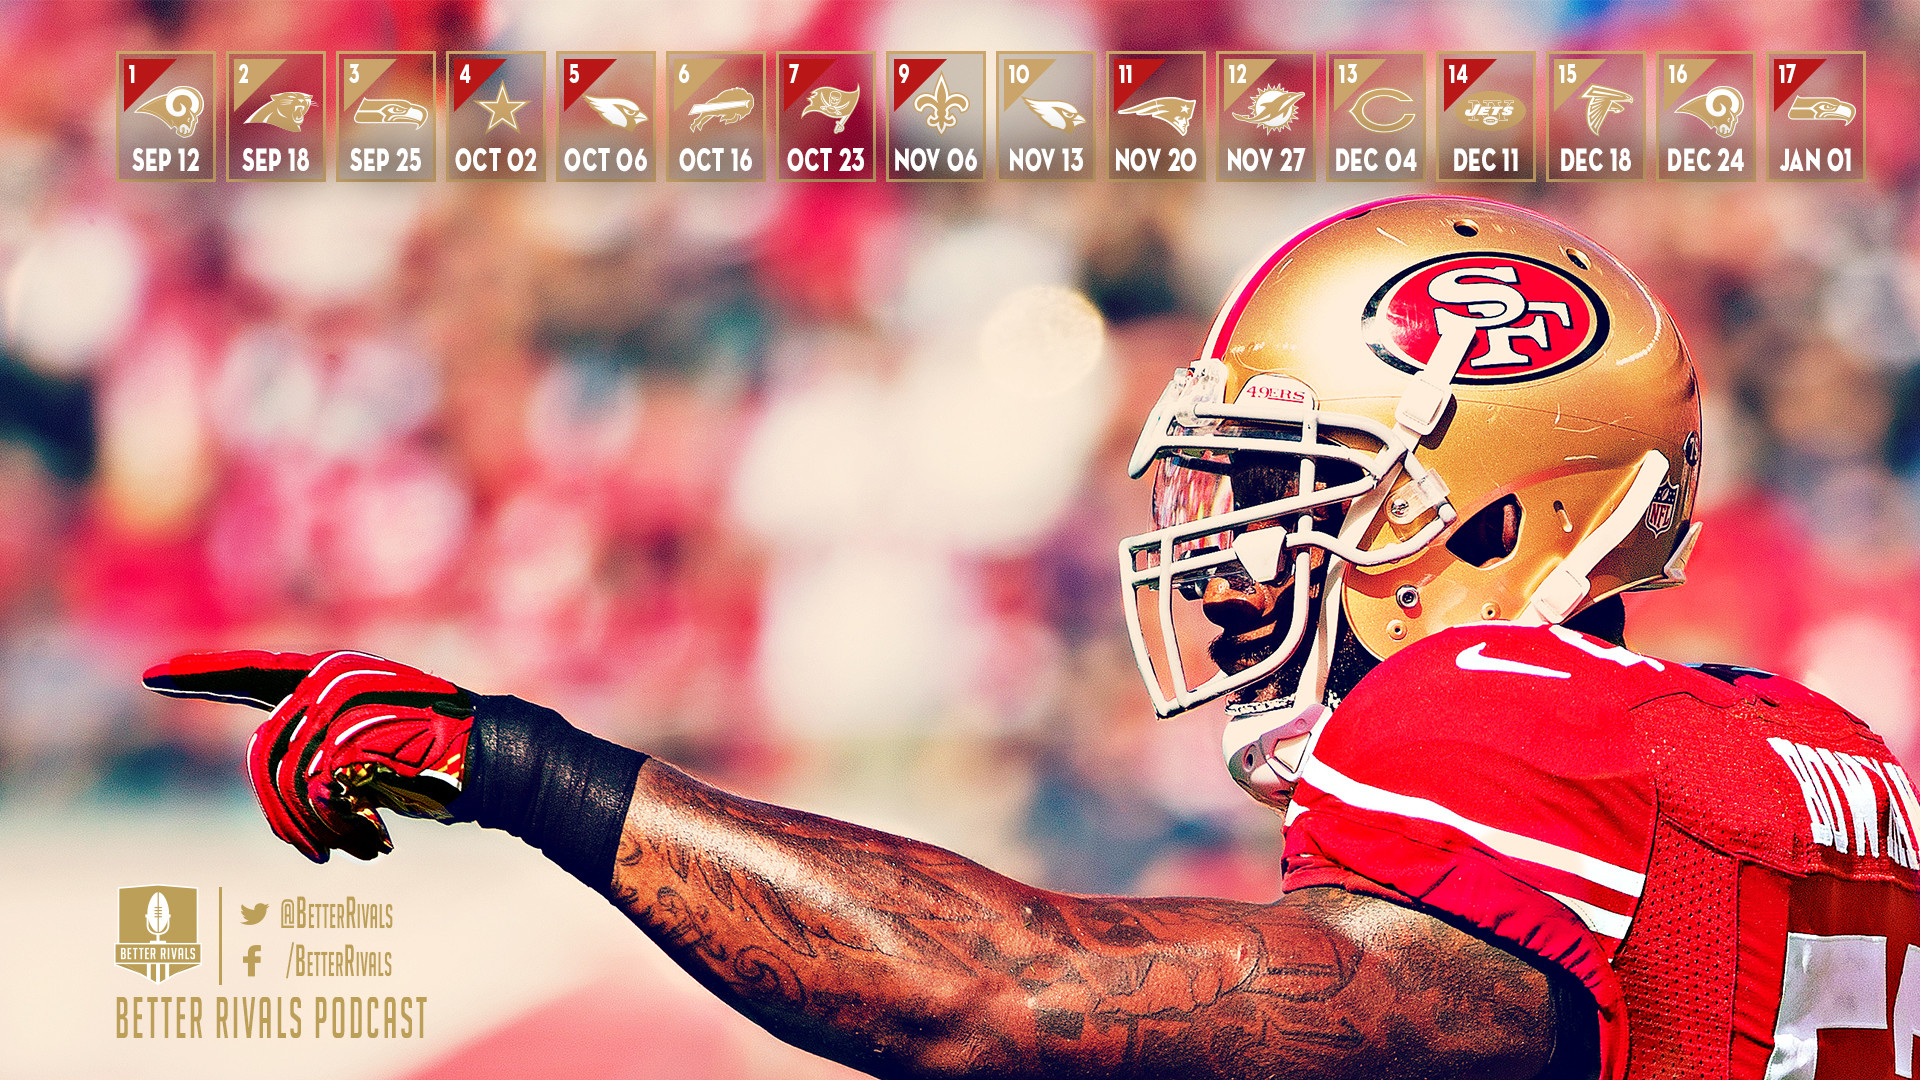 1920x1080 ... new 49ers wallpapers for desktop and mobile niners nation ...